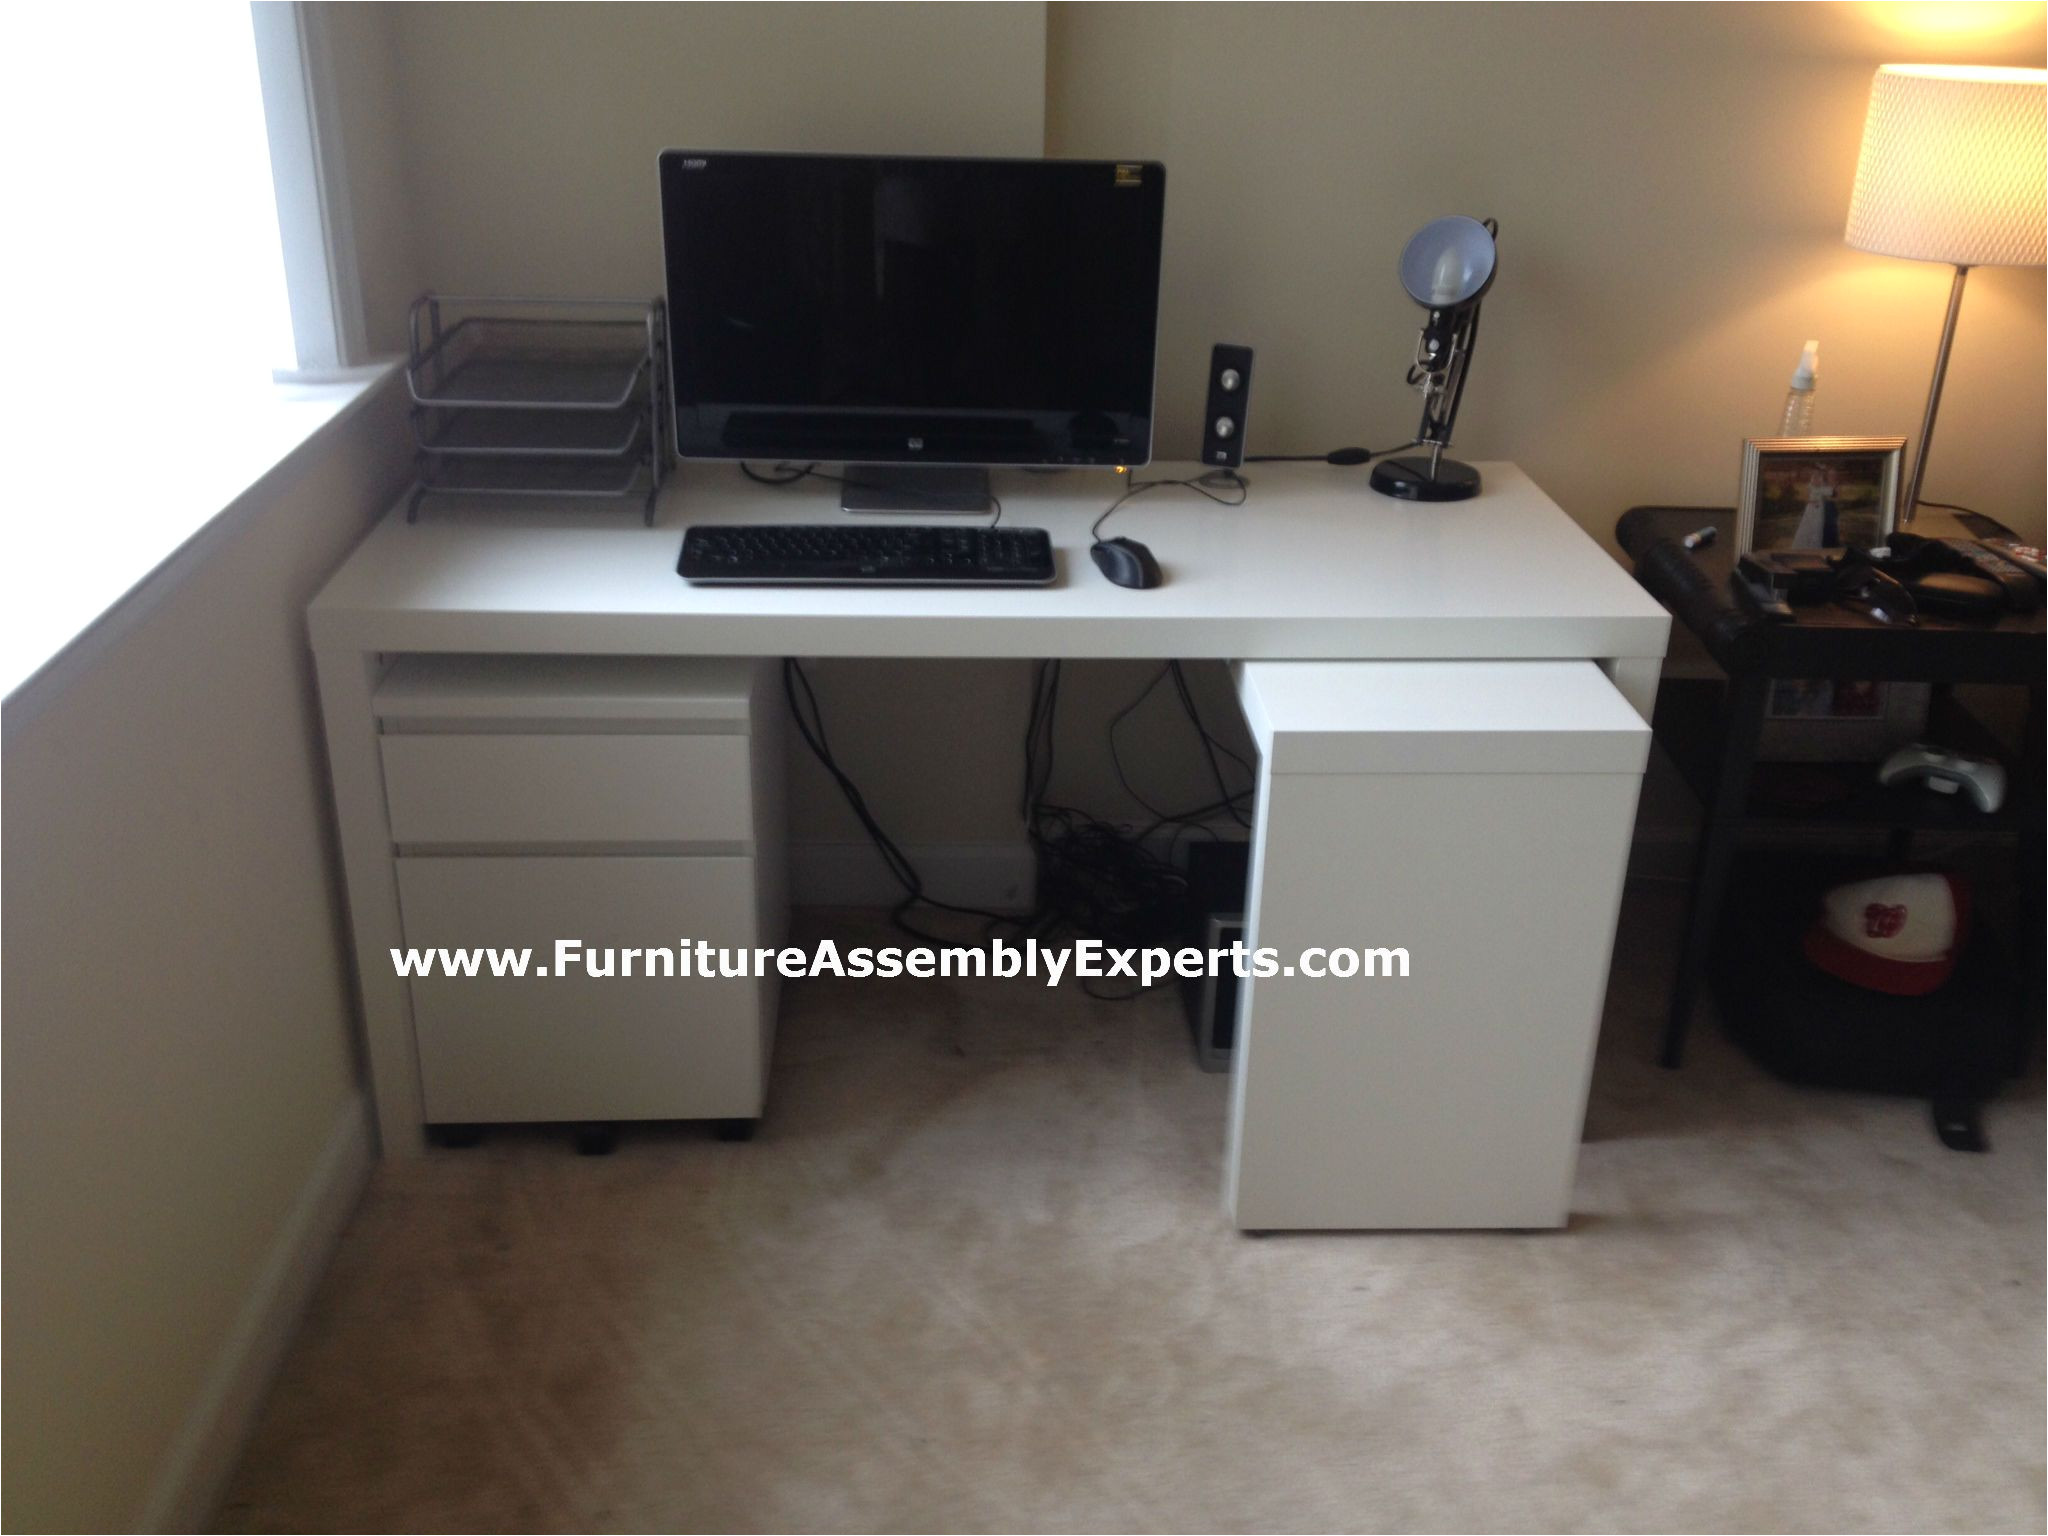 ikea malm desk with galant file cabinet assembled in philadephia pa by furniture assembly experts llc